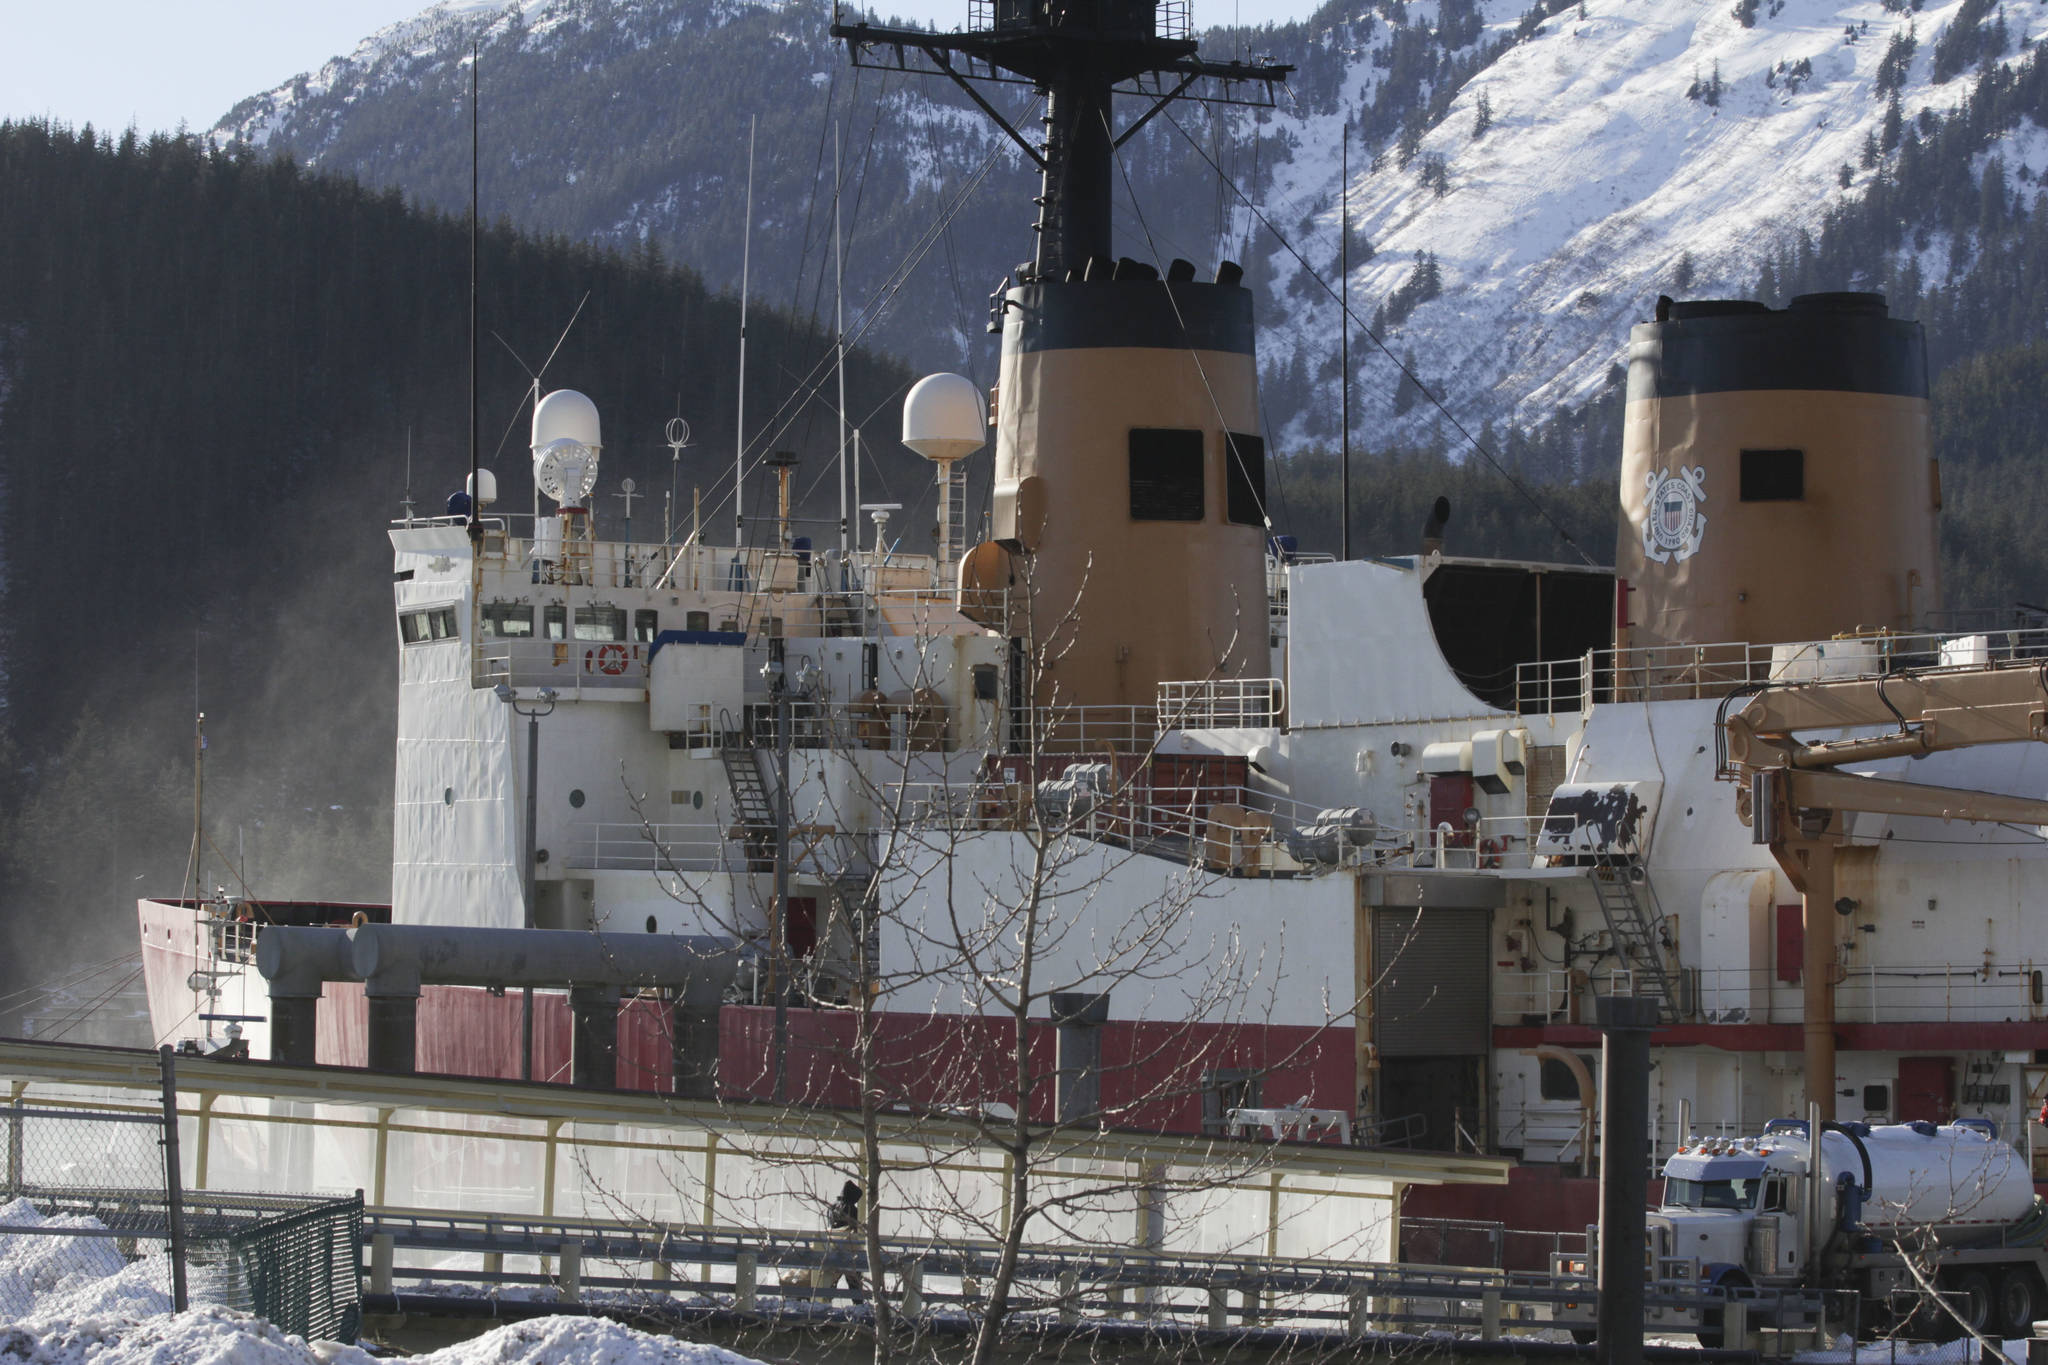 Michael S. Lockett / Juneau Empire
The U.S. Coast Guard Cutter Polar Star arrived in Juneau on Friday to resupply from extended operations in the Arctic over the winter.